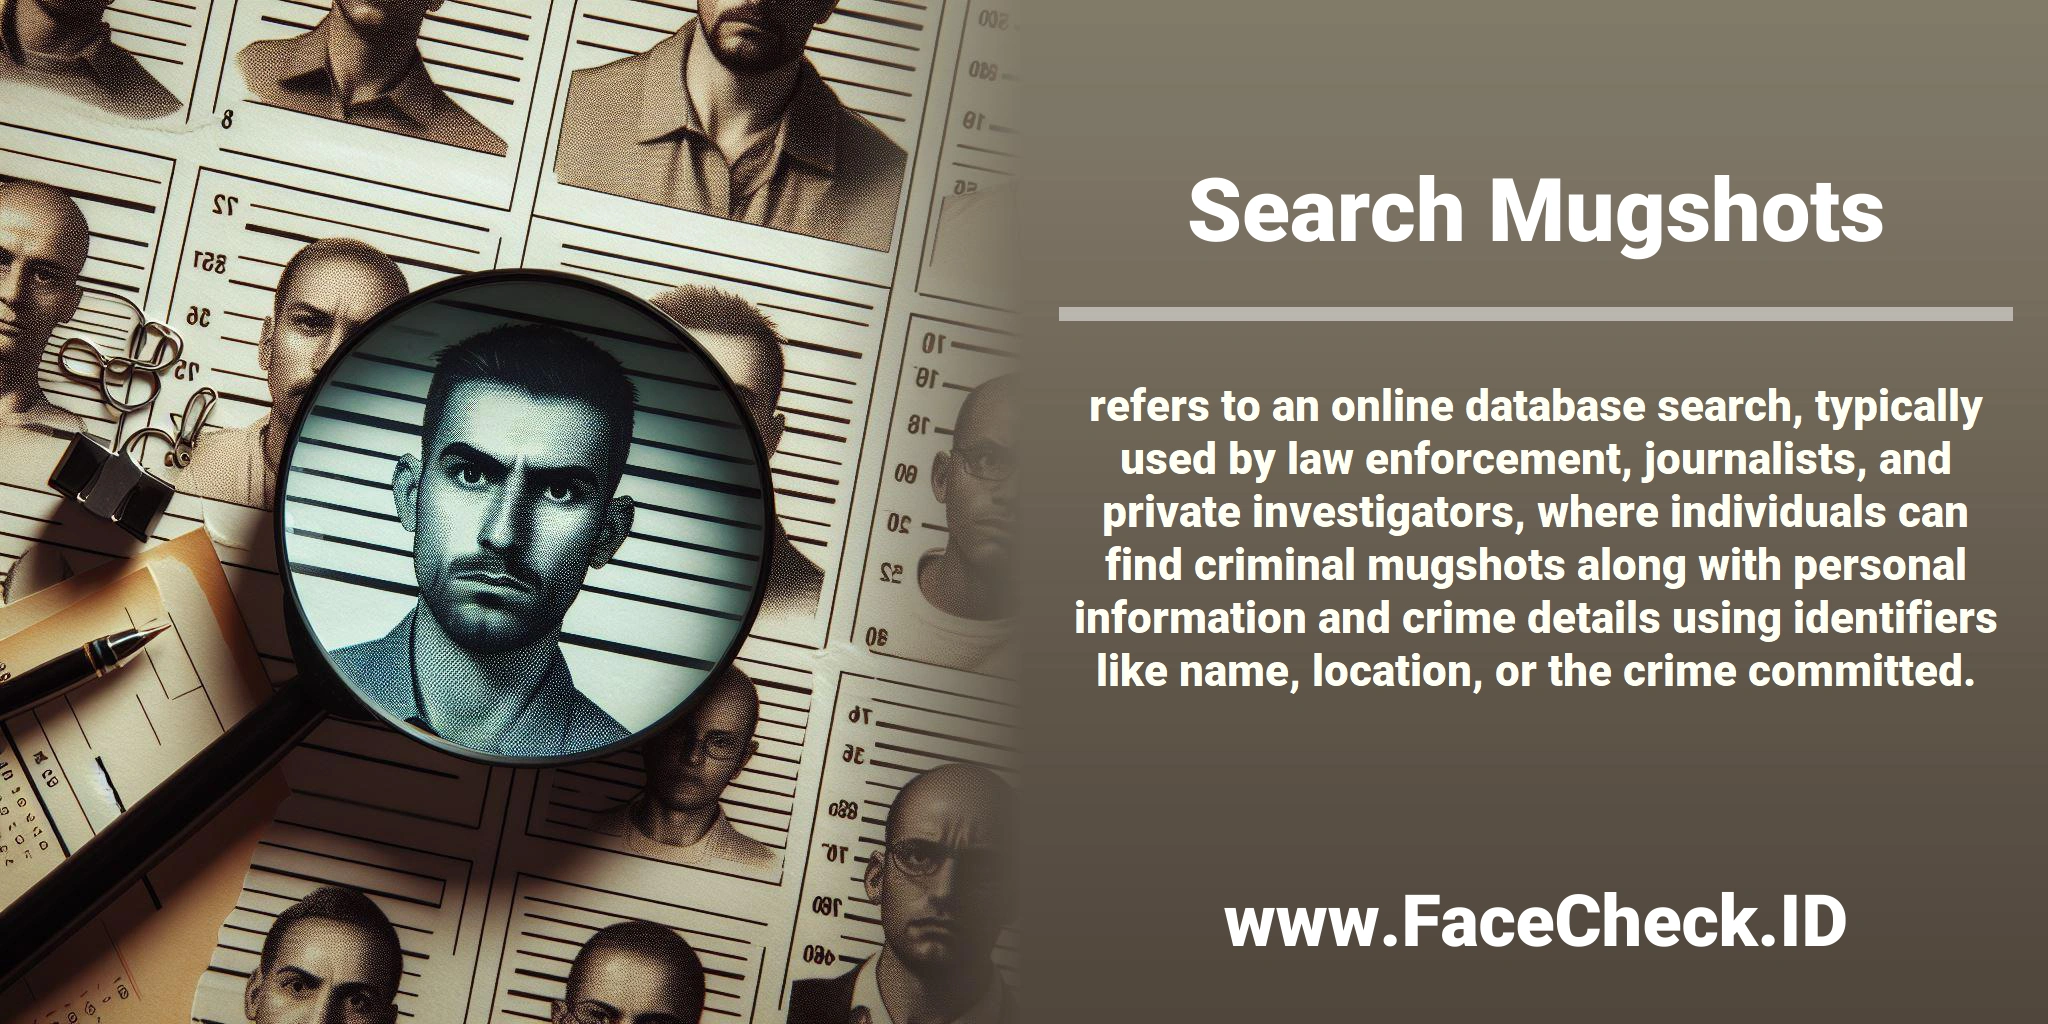 <b>Search Mugshots</b> refers to an online database search, typically used by law enforcement, journalists, and private investigators, where individuals can find criminal mugshots along with personal information and crime details using identifiers like name, location, or the crime committed.